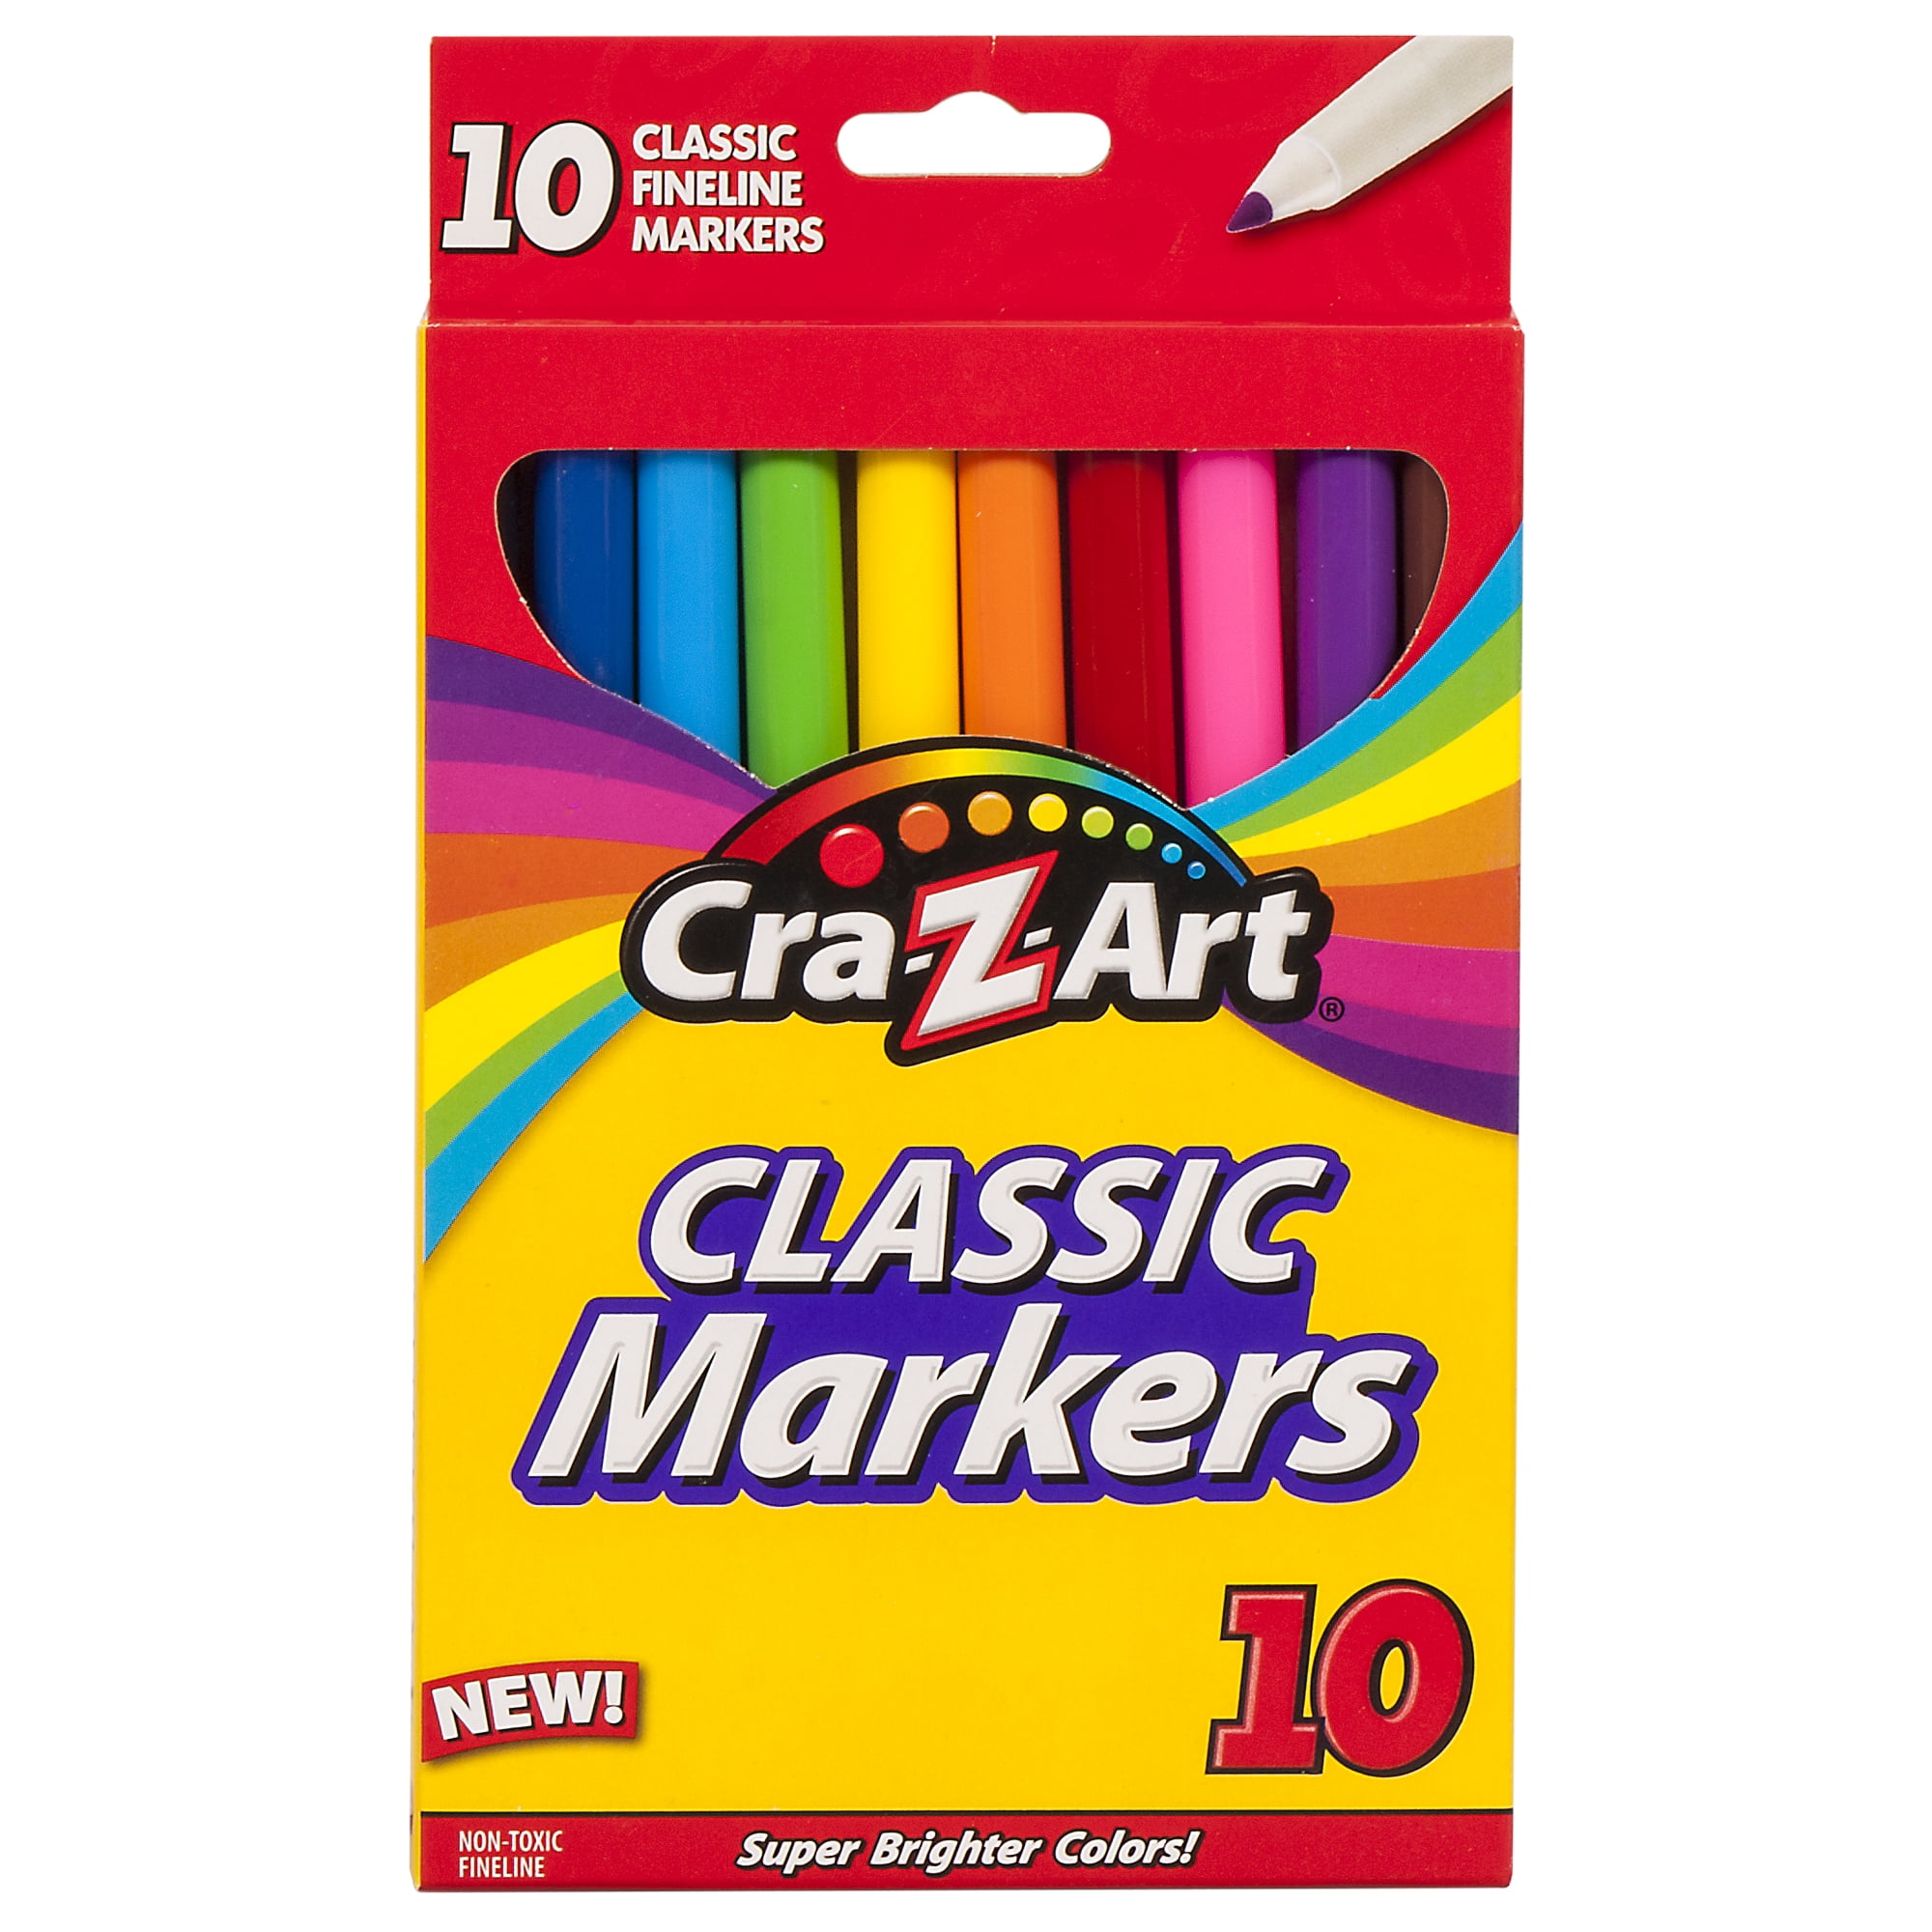 80 colour Alcohol Based Art Markers, permanent art marker set in